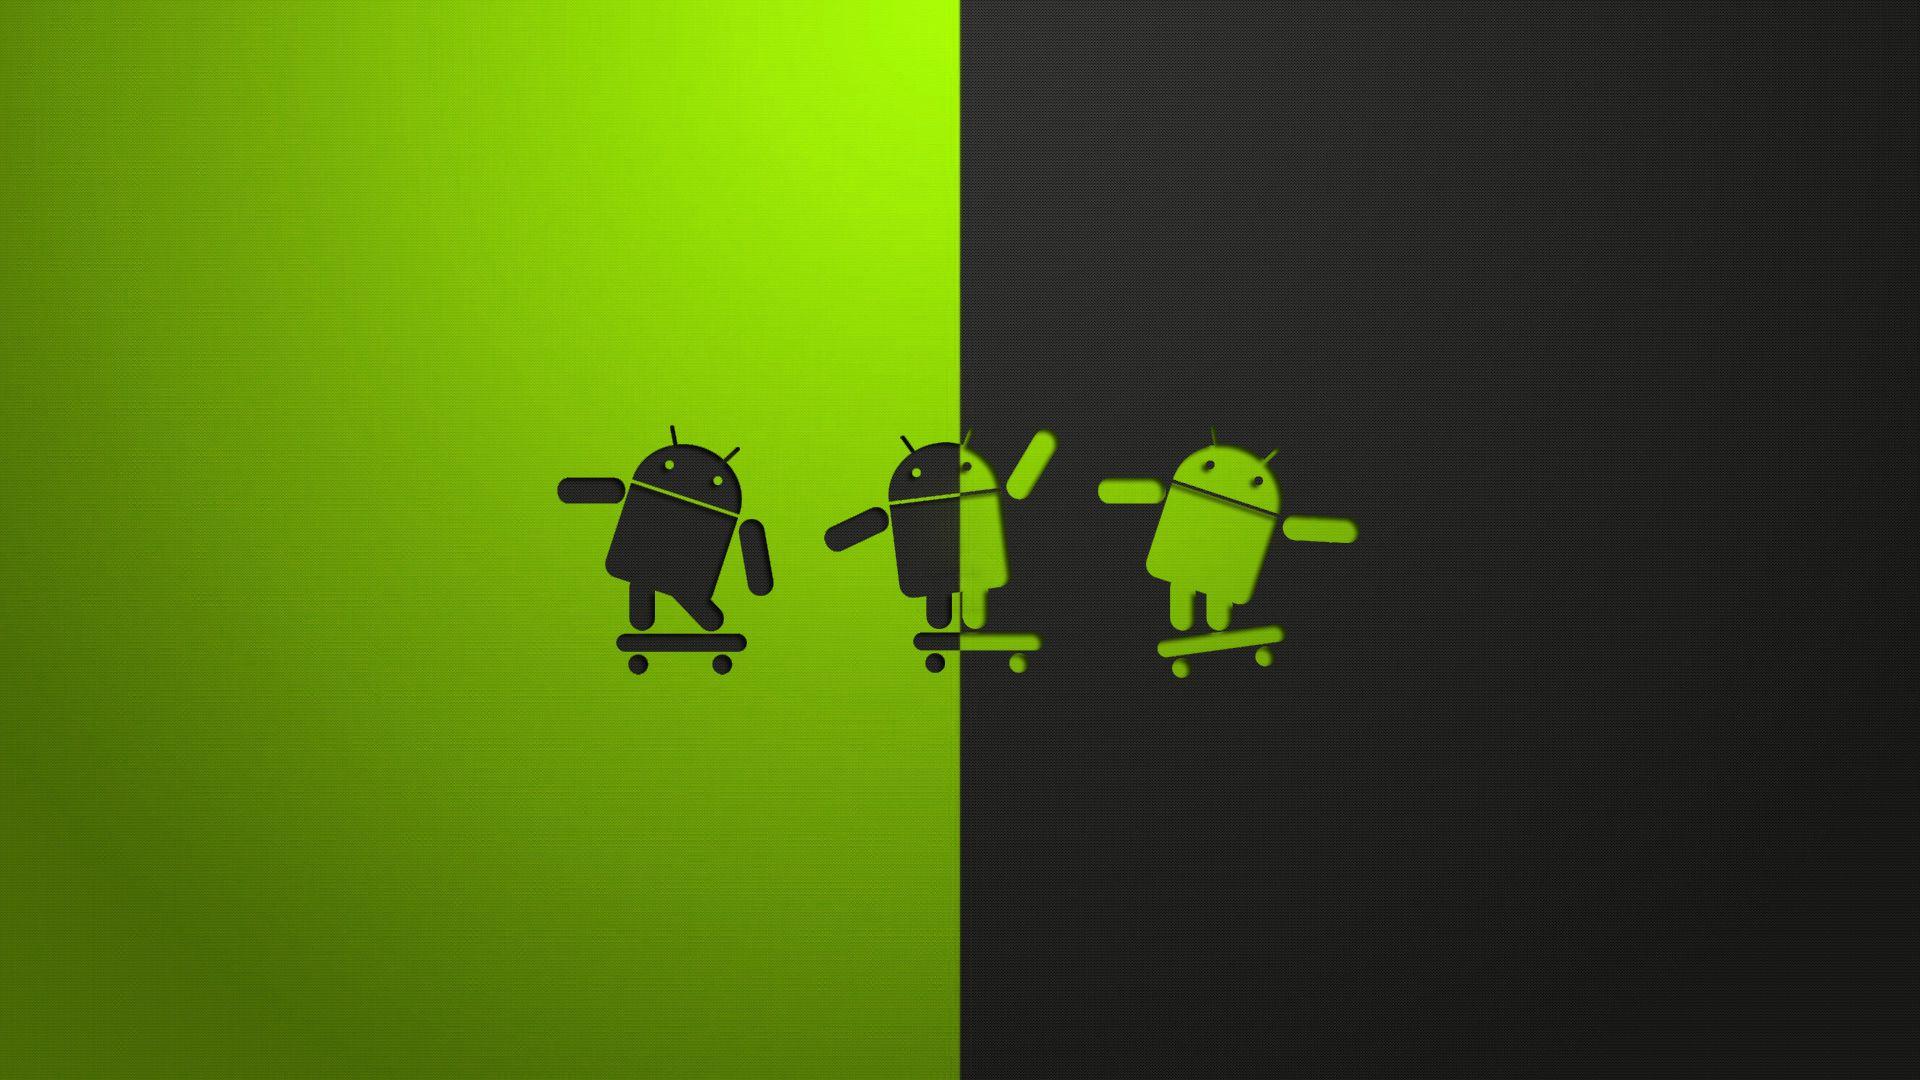 Cool Android Wallpaper 45250 1920x1080 px